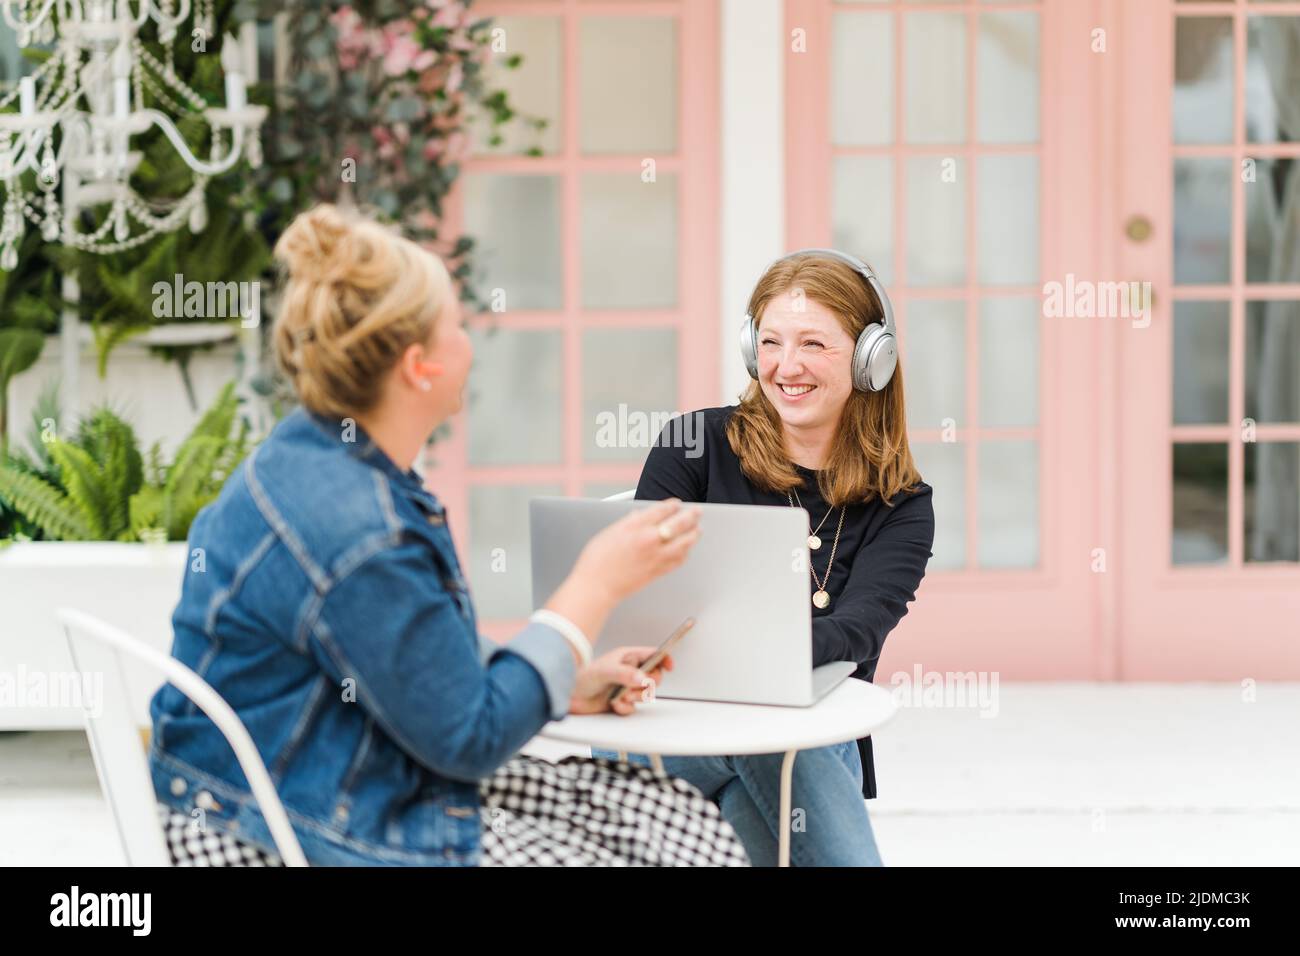 Two smiling women sitting at table with laptop and phone wearing headphones Stock Photo